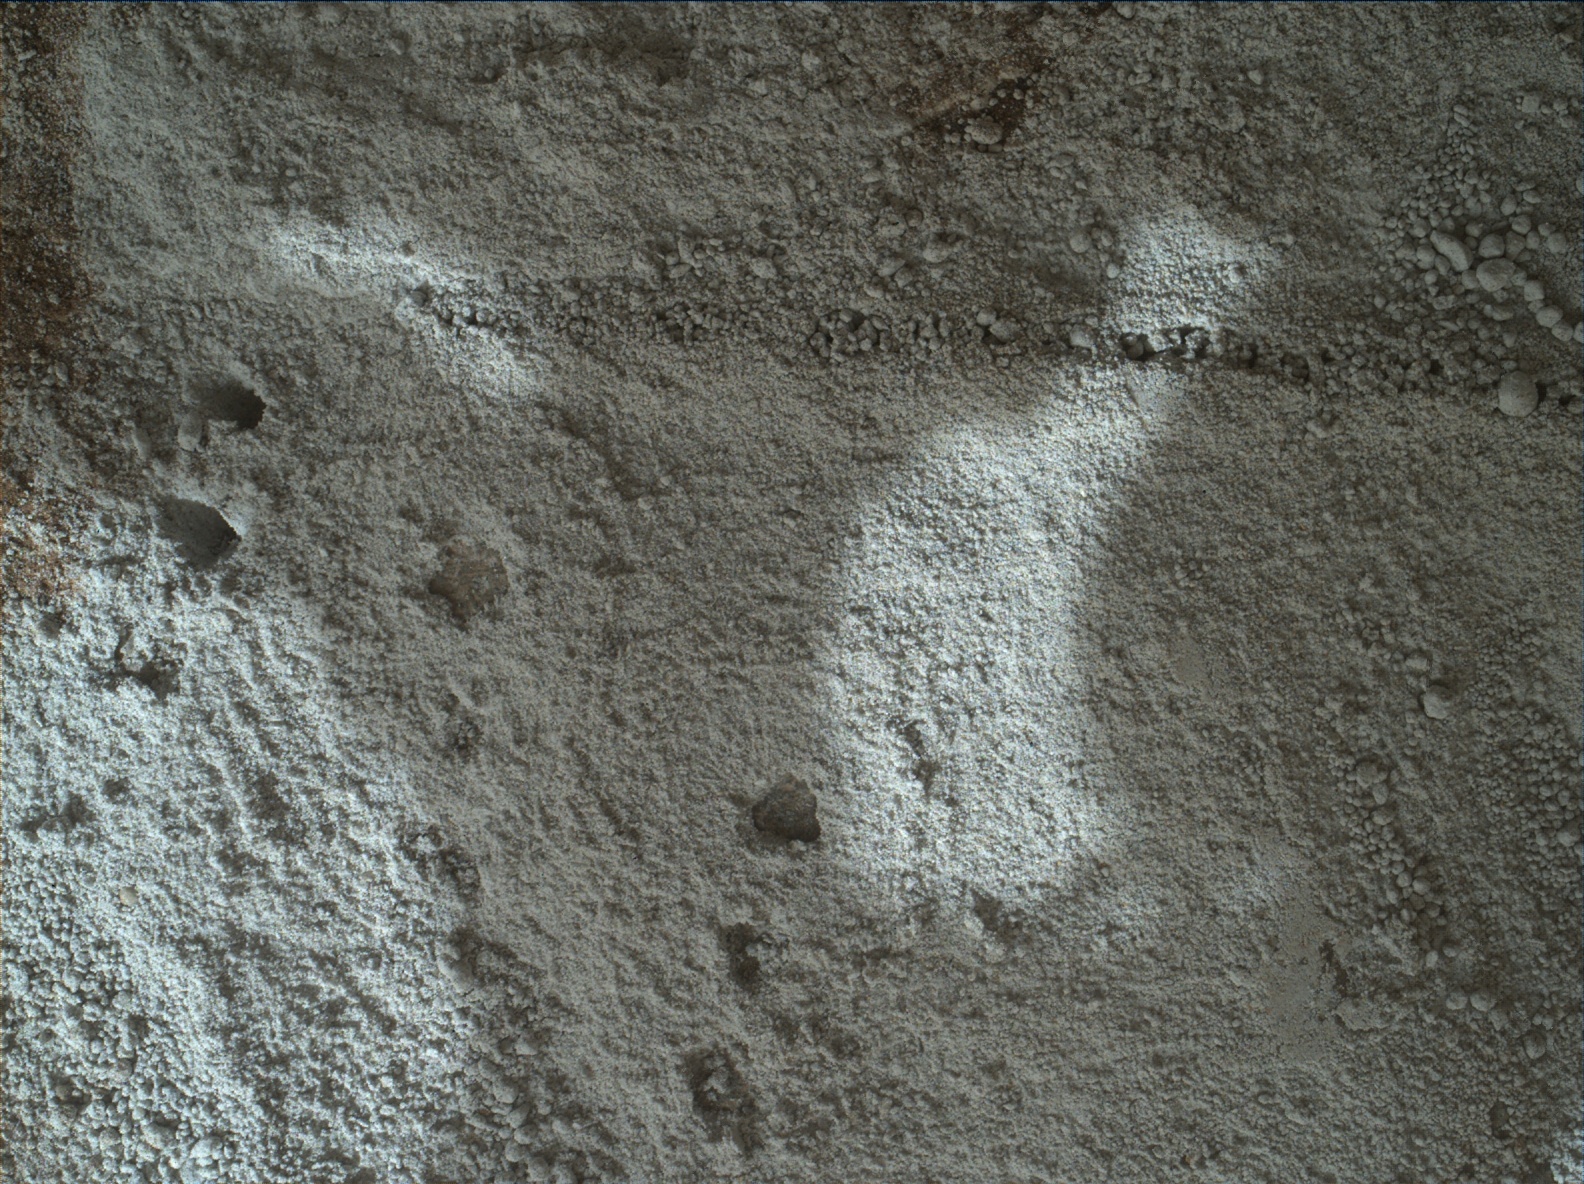 Nasa's Mars rover Curiosity acquired this image using its Mars Hand Lens Imager (MAHLI) on Sol 1326